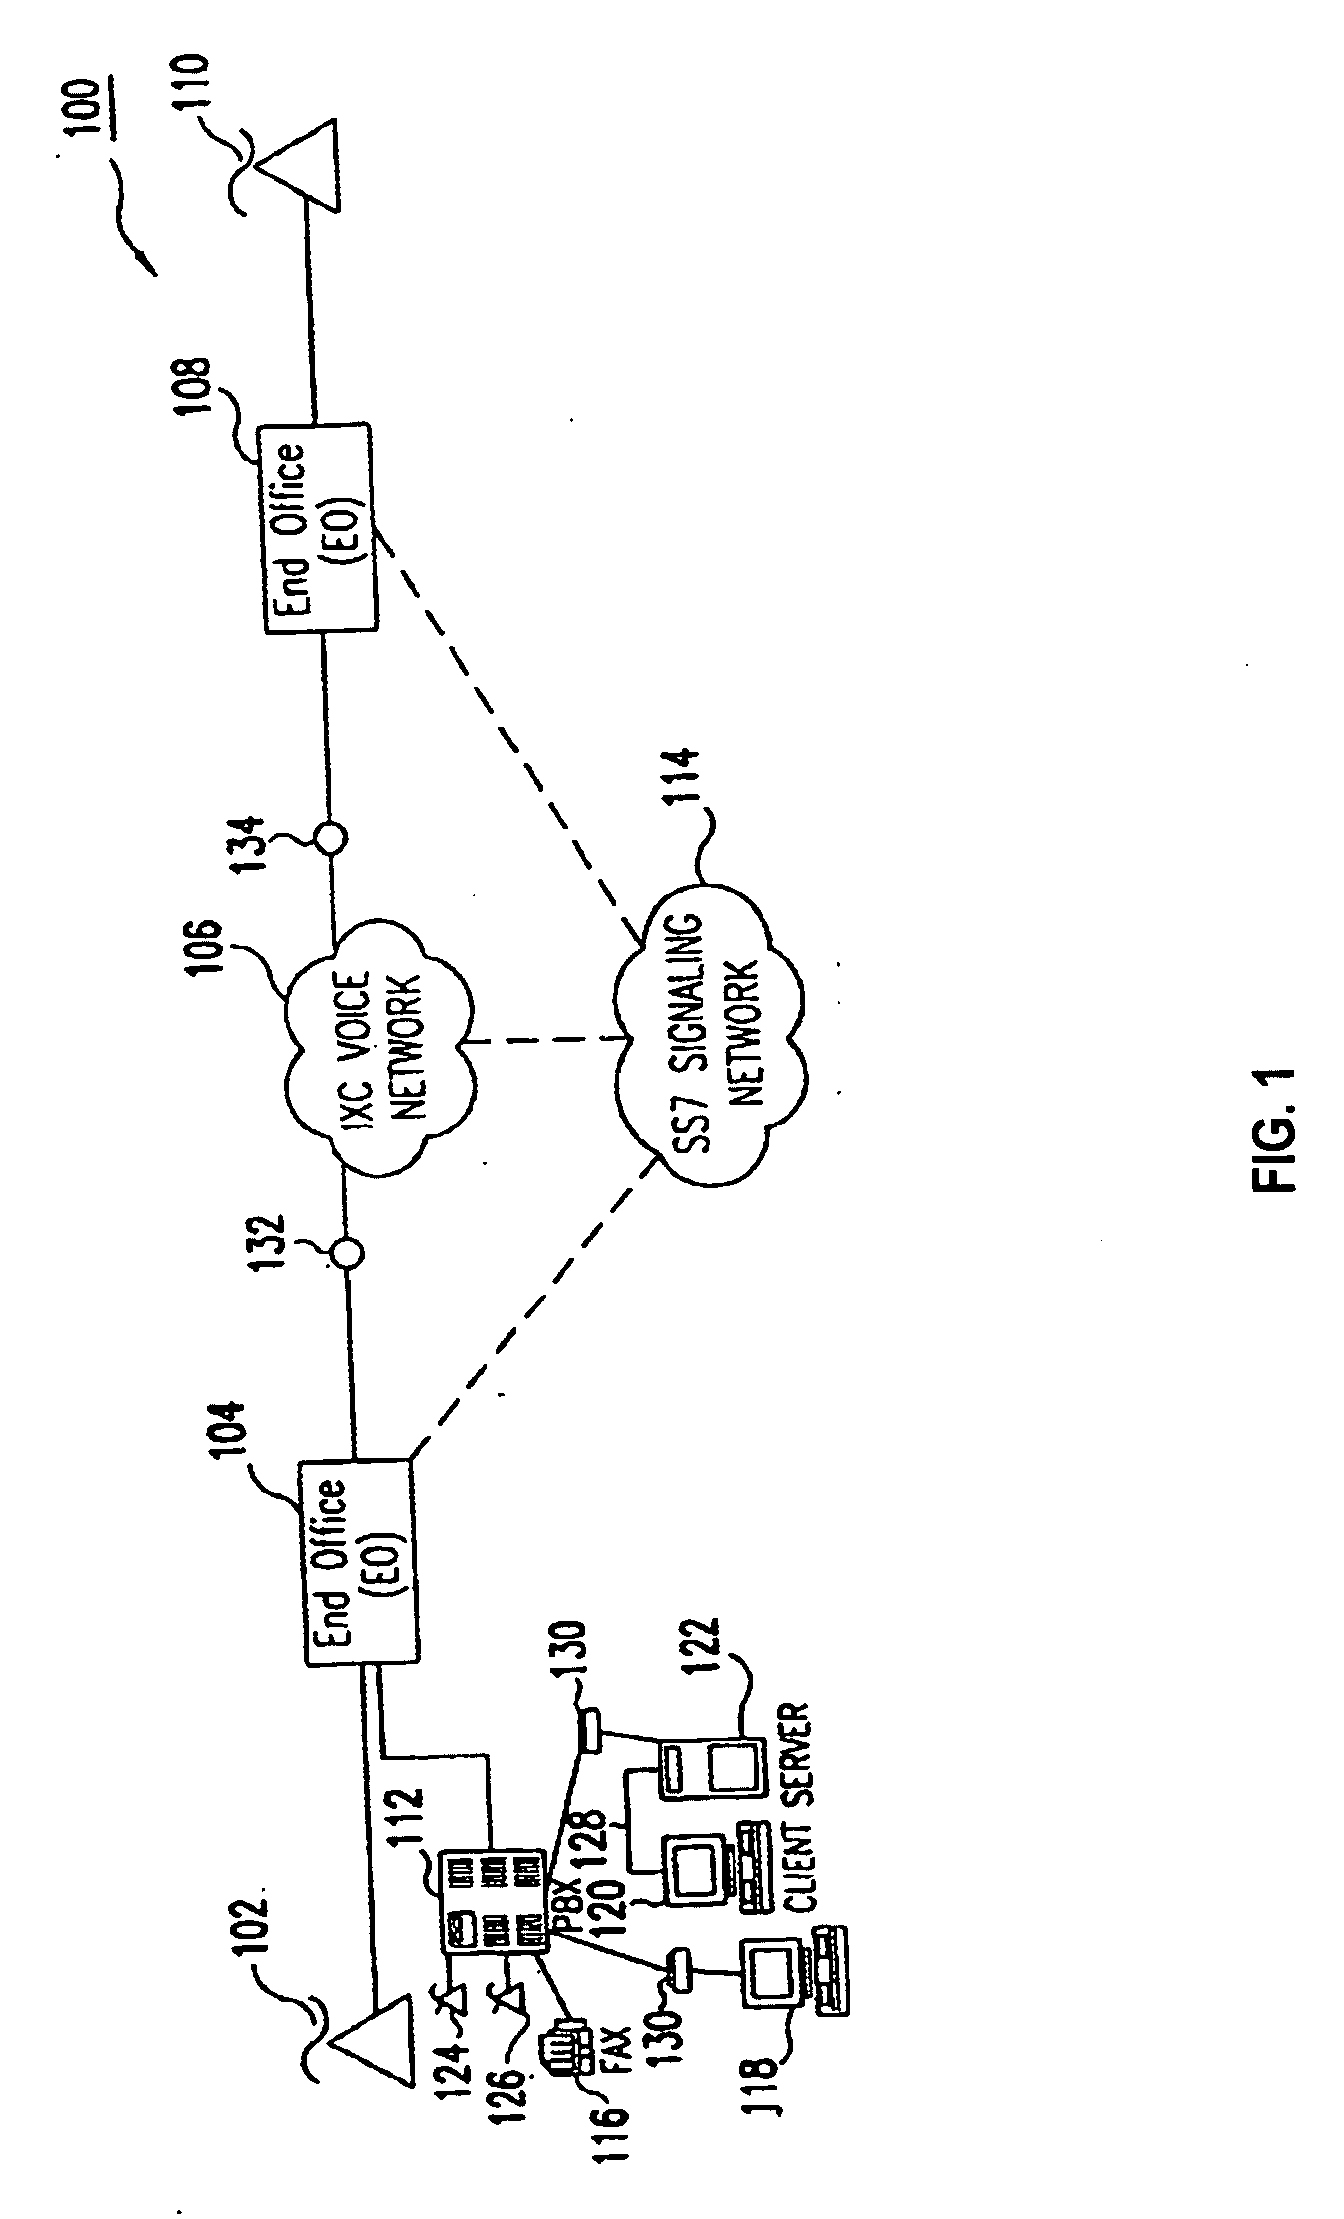 Apparatus, system, method and computer program product for pre-paid long distance telecommunications